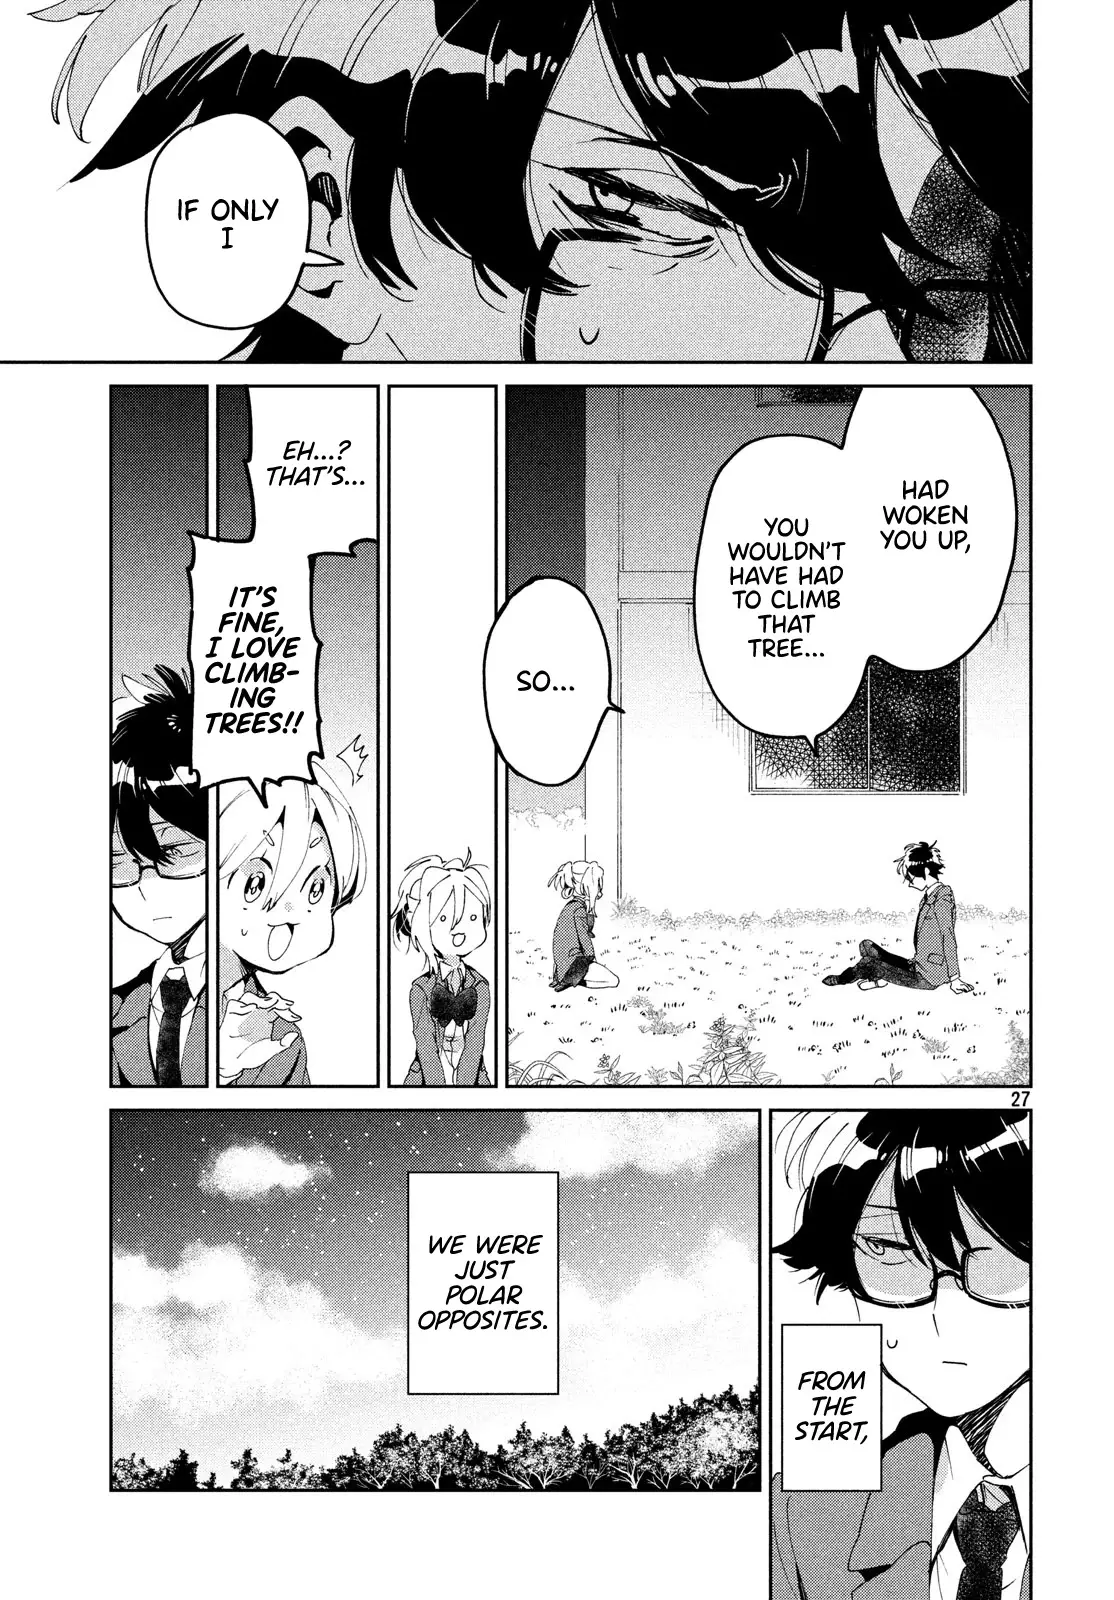 I Love You, As A Friend - 5 page 27-658cf096